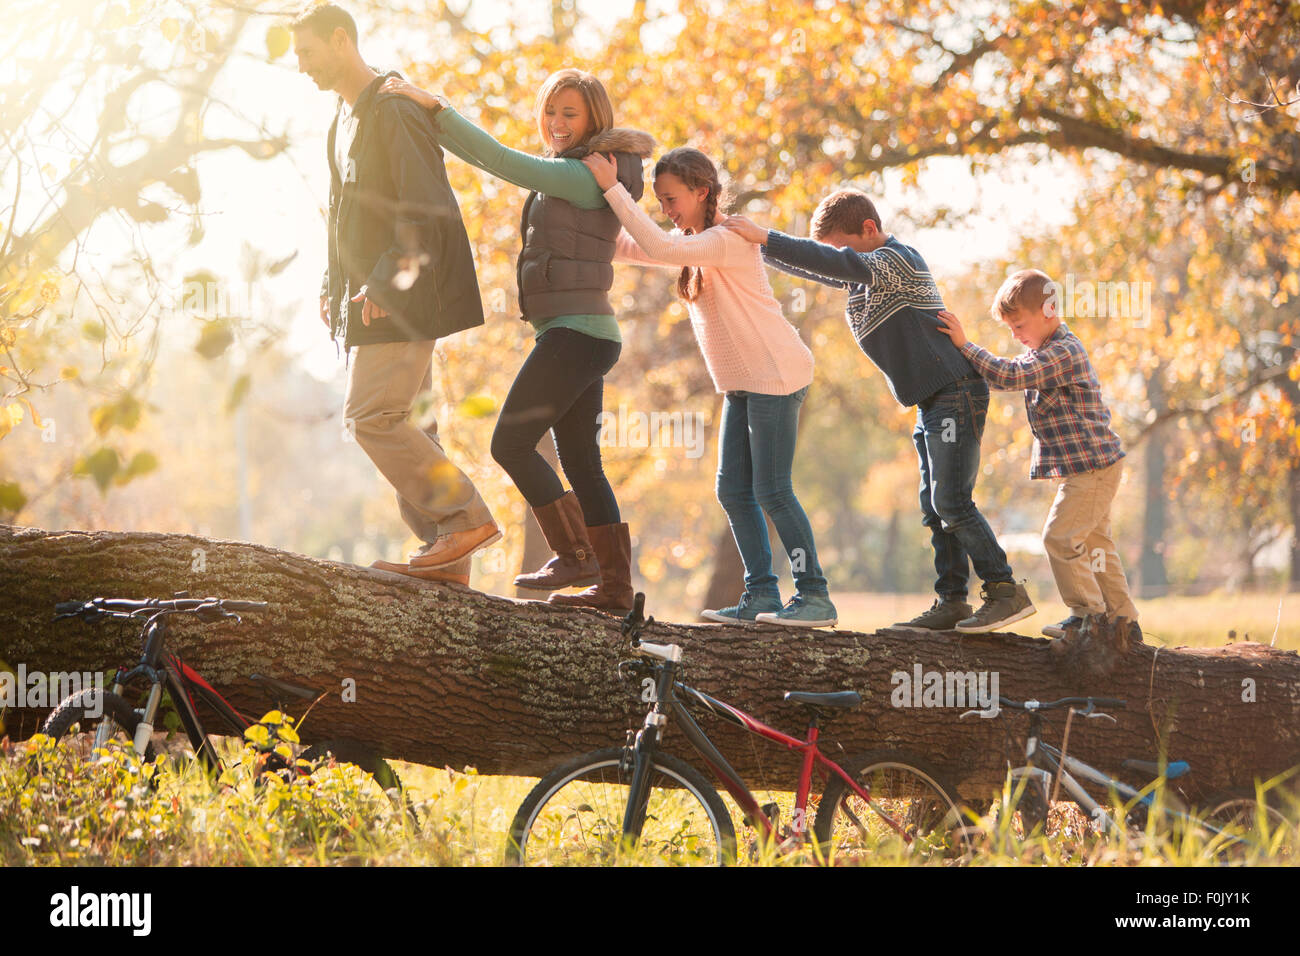 Family walking in a row on fallen log near bicycles Stock Photo